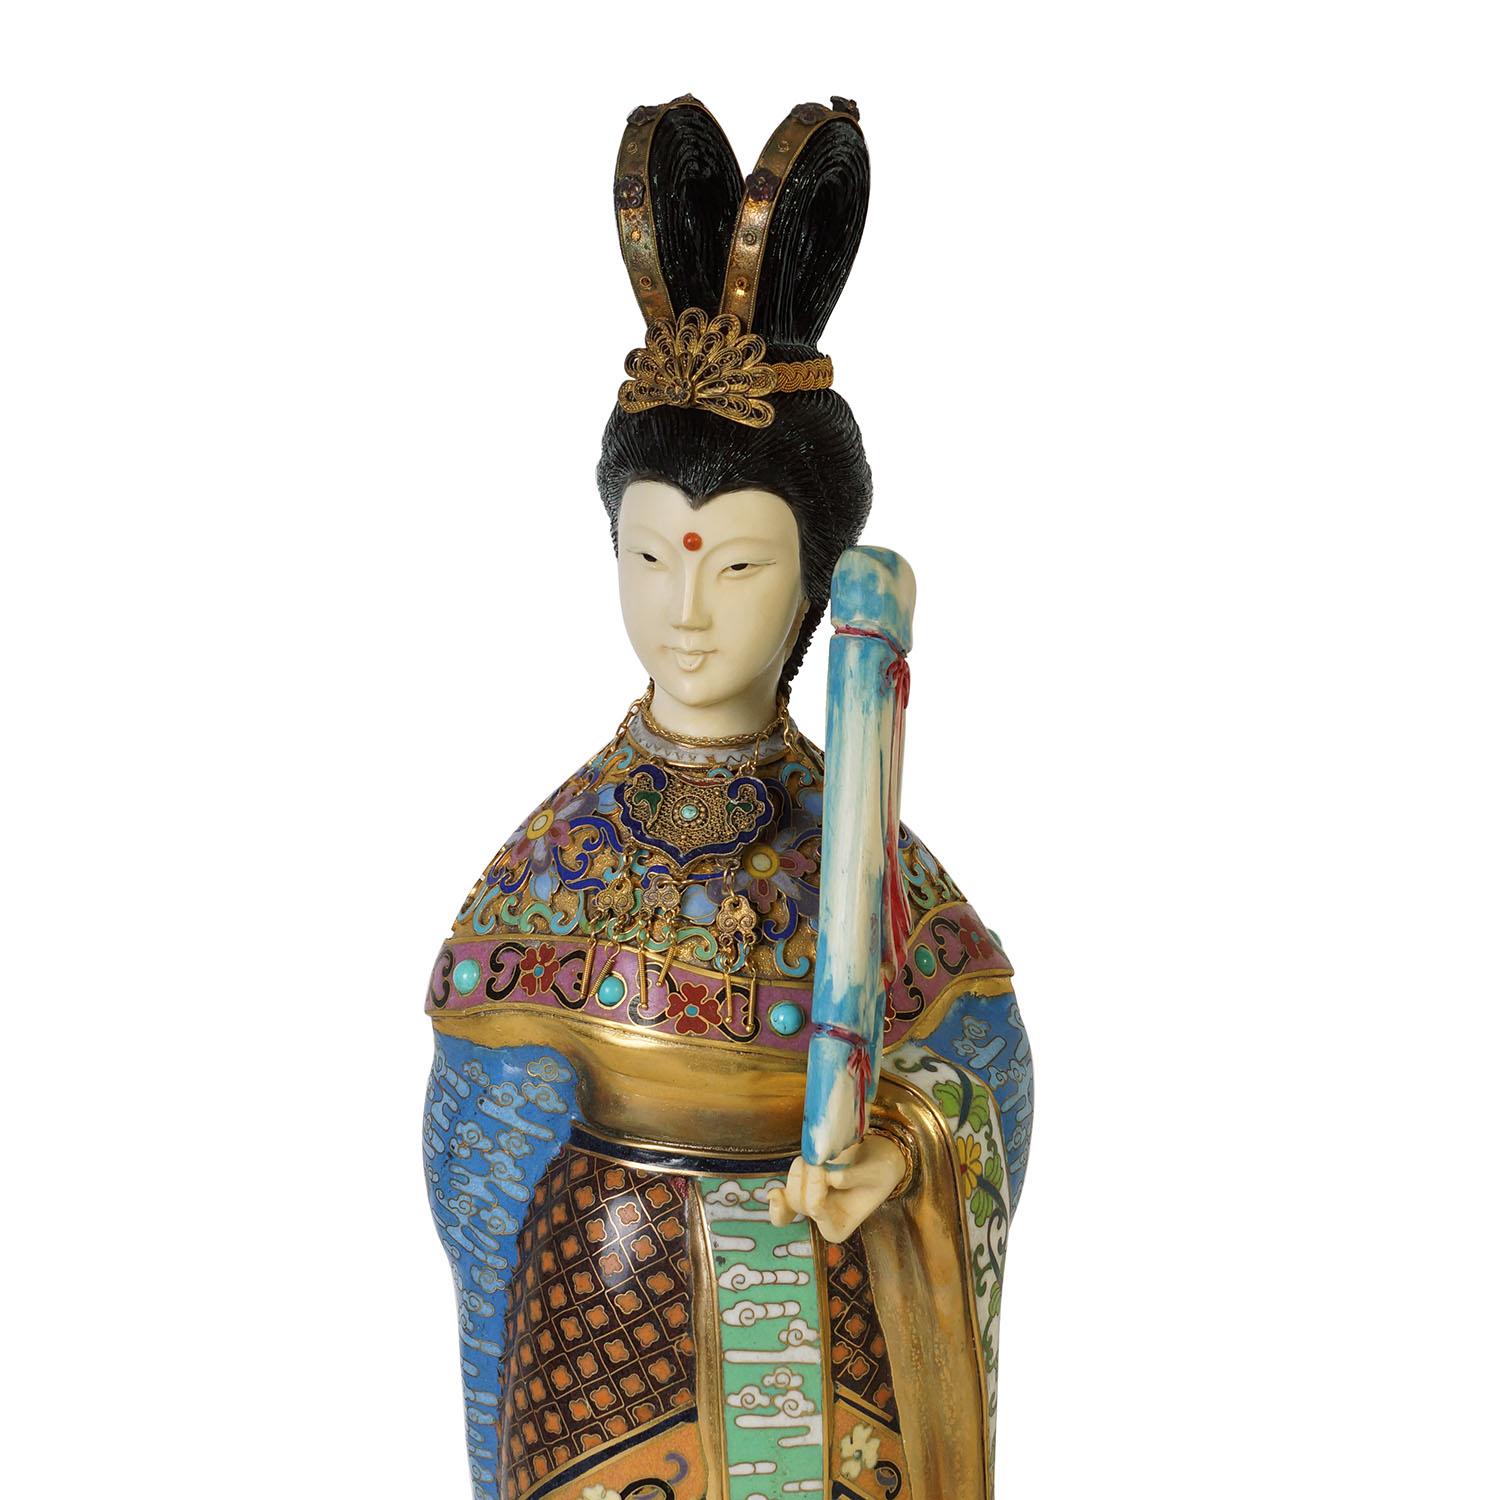 Look at this magnificent Chinese Antique Cloisonne Beauty Figurine. It was hand made from gold copper cloisonne. This stand Beauty has very detailed handcrafted cloisonne arts works all over it with a Chinese musical instrument held in her hands. It